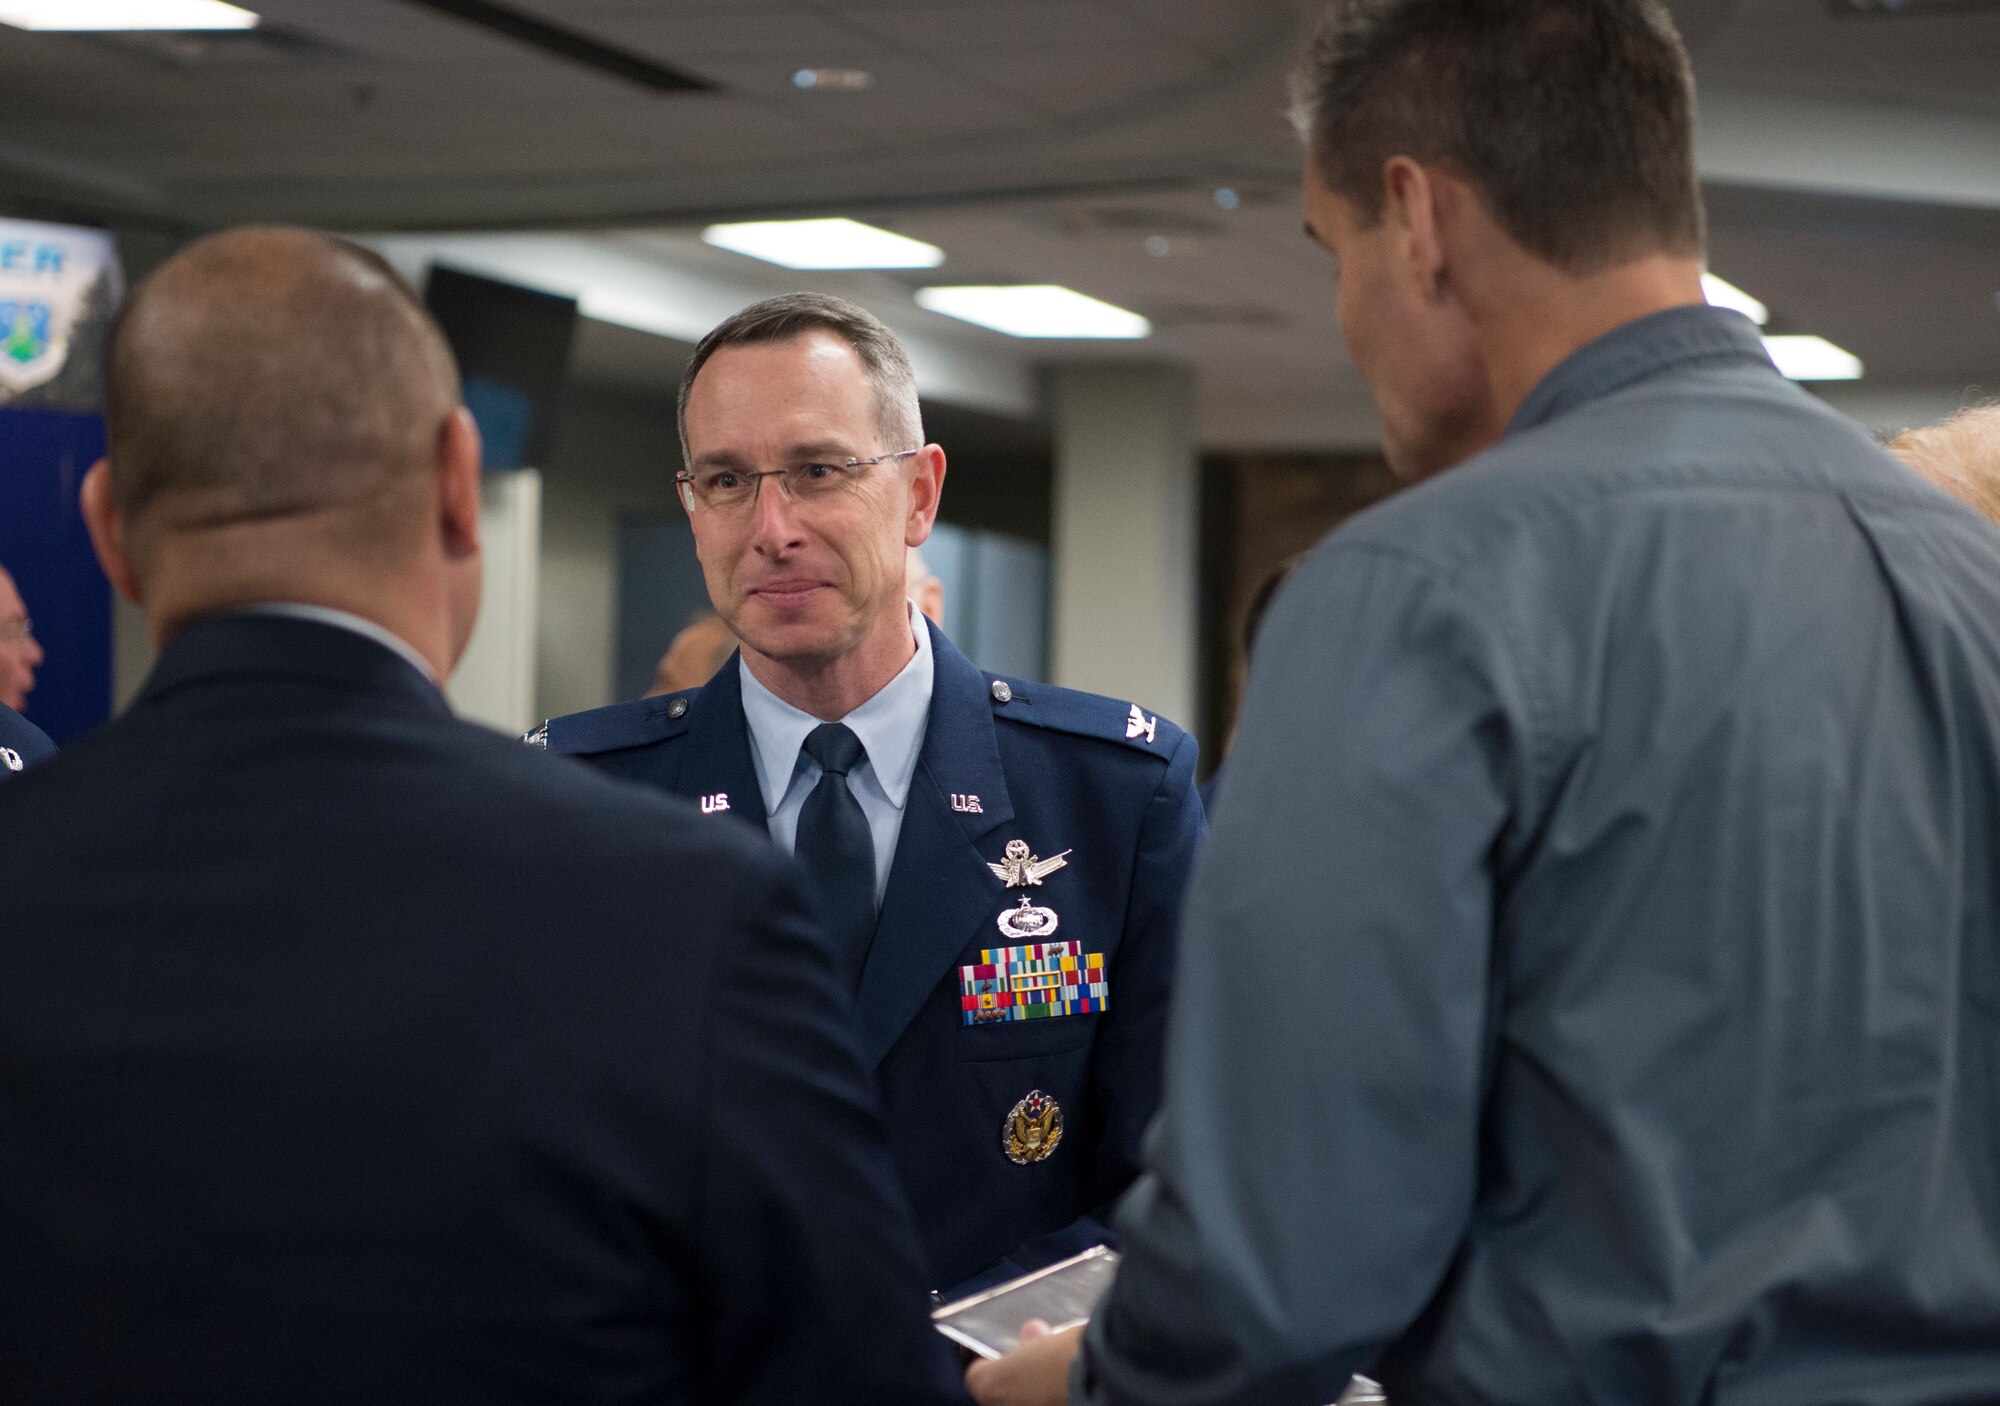 The Buckley AFB Honorary Commander Program’s purpose is to identify common interests between civilian and military life, and aims to support community efforts and to work together to solve mutual problems. (U.S. Air Force photo by Airman 1st Class Holden S. Faul)